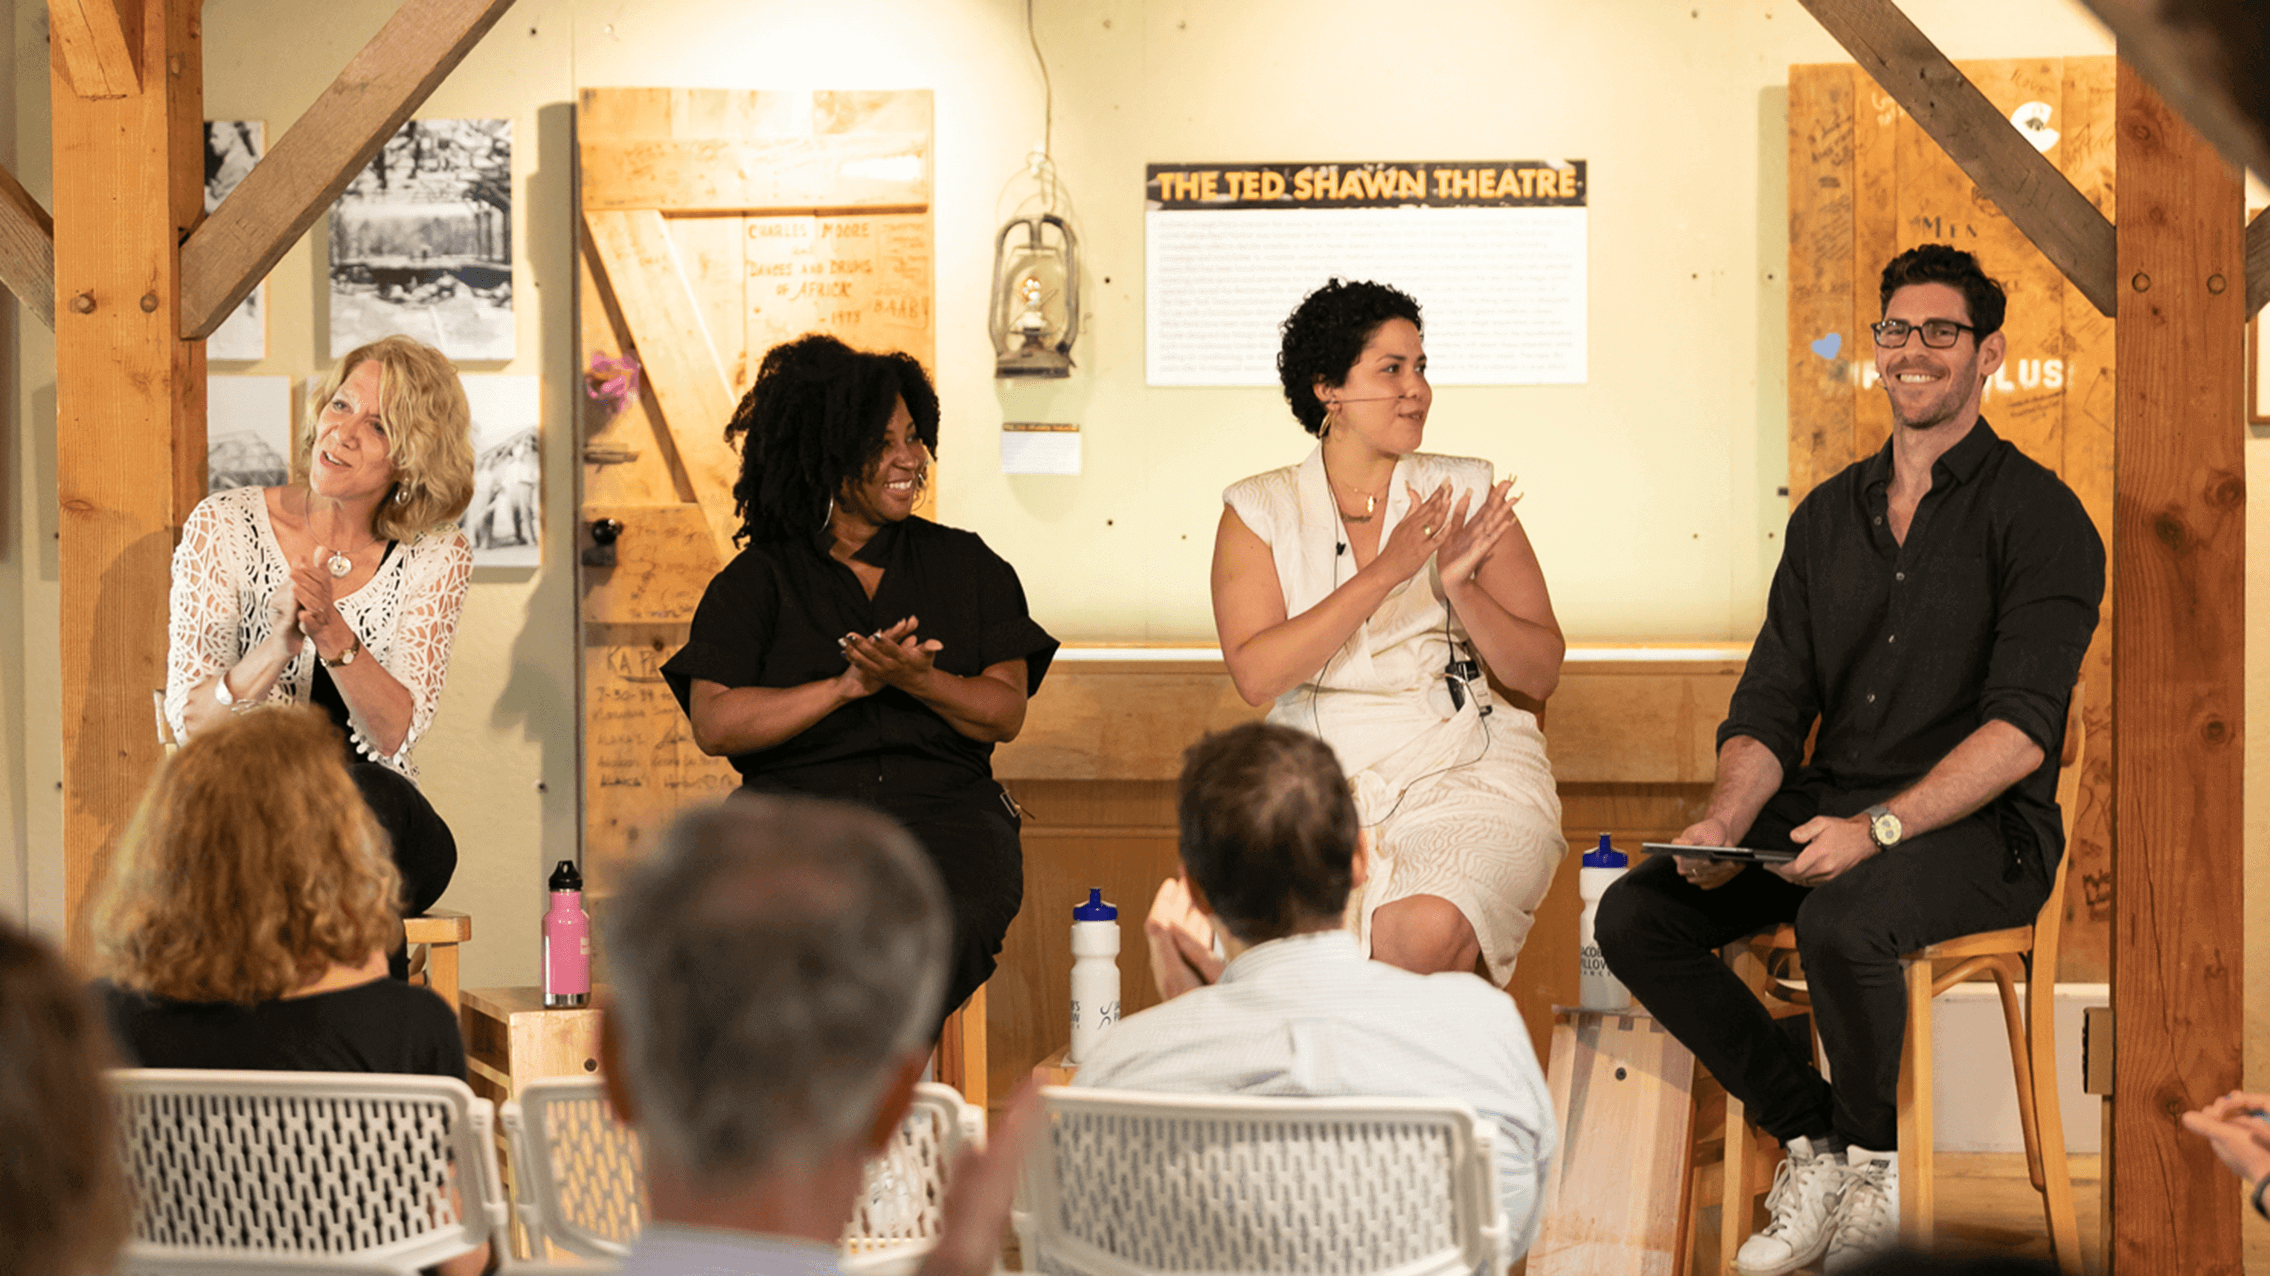 Jacob's Pillow Director Pamela Tatge, Associate Curators Melanie George and Ali Rosa-Salas, and Scholar-in-Residence Brian Schaefer are seated in chairs left to right facing audiences clapping at the end of their PillowTalk, Curatorial Voices.